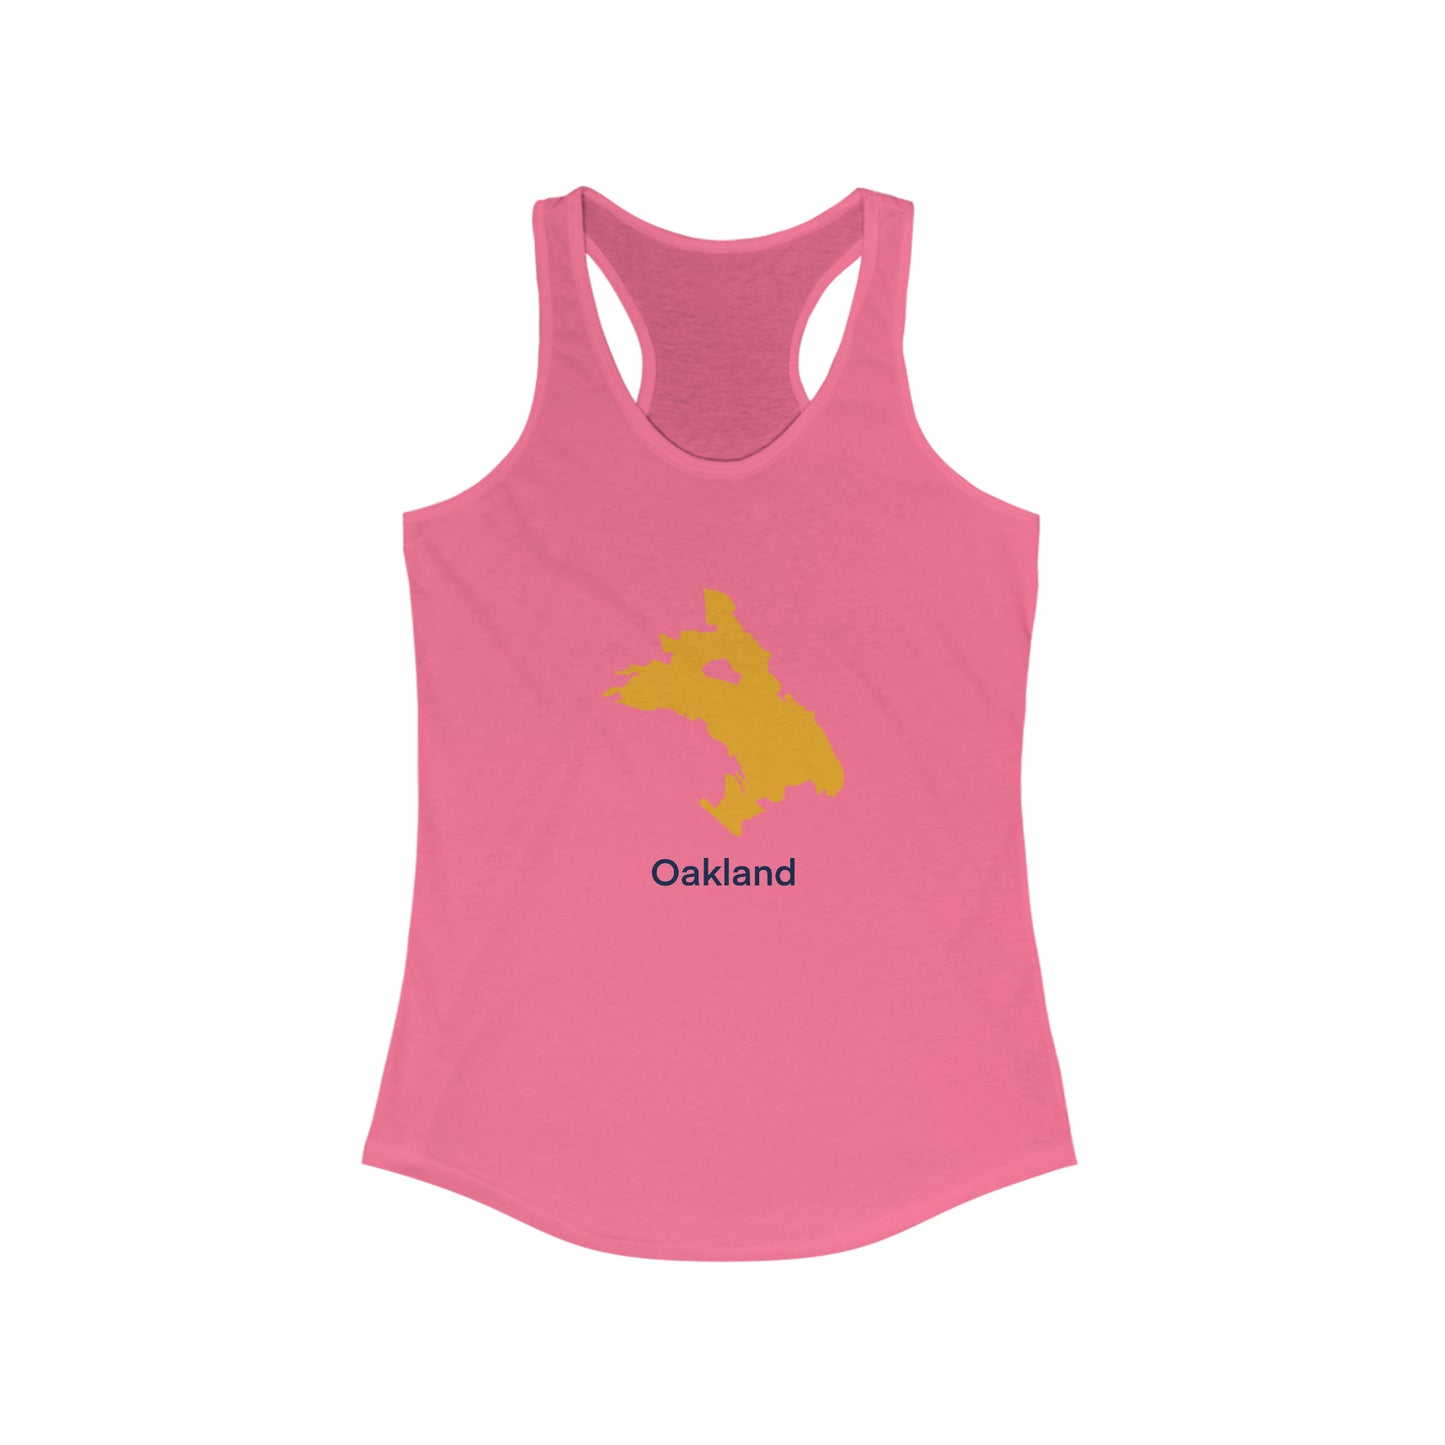 Chicago in Yellow Women's Ideal Racerback Tank